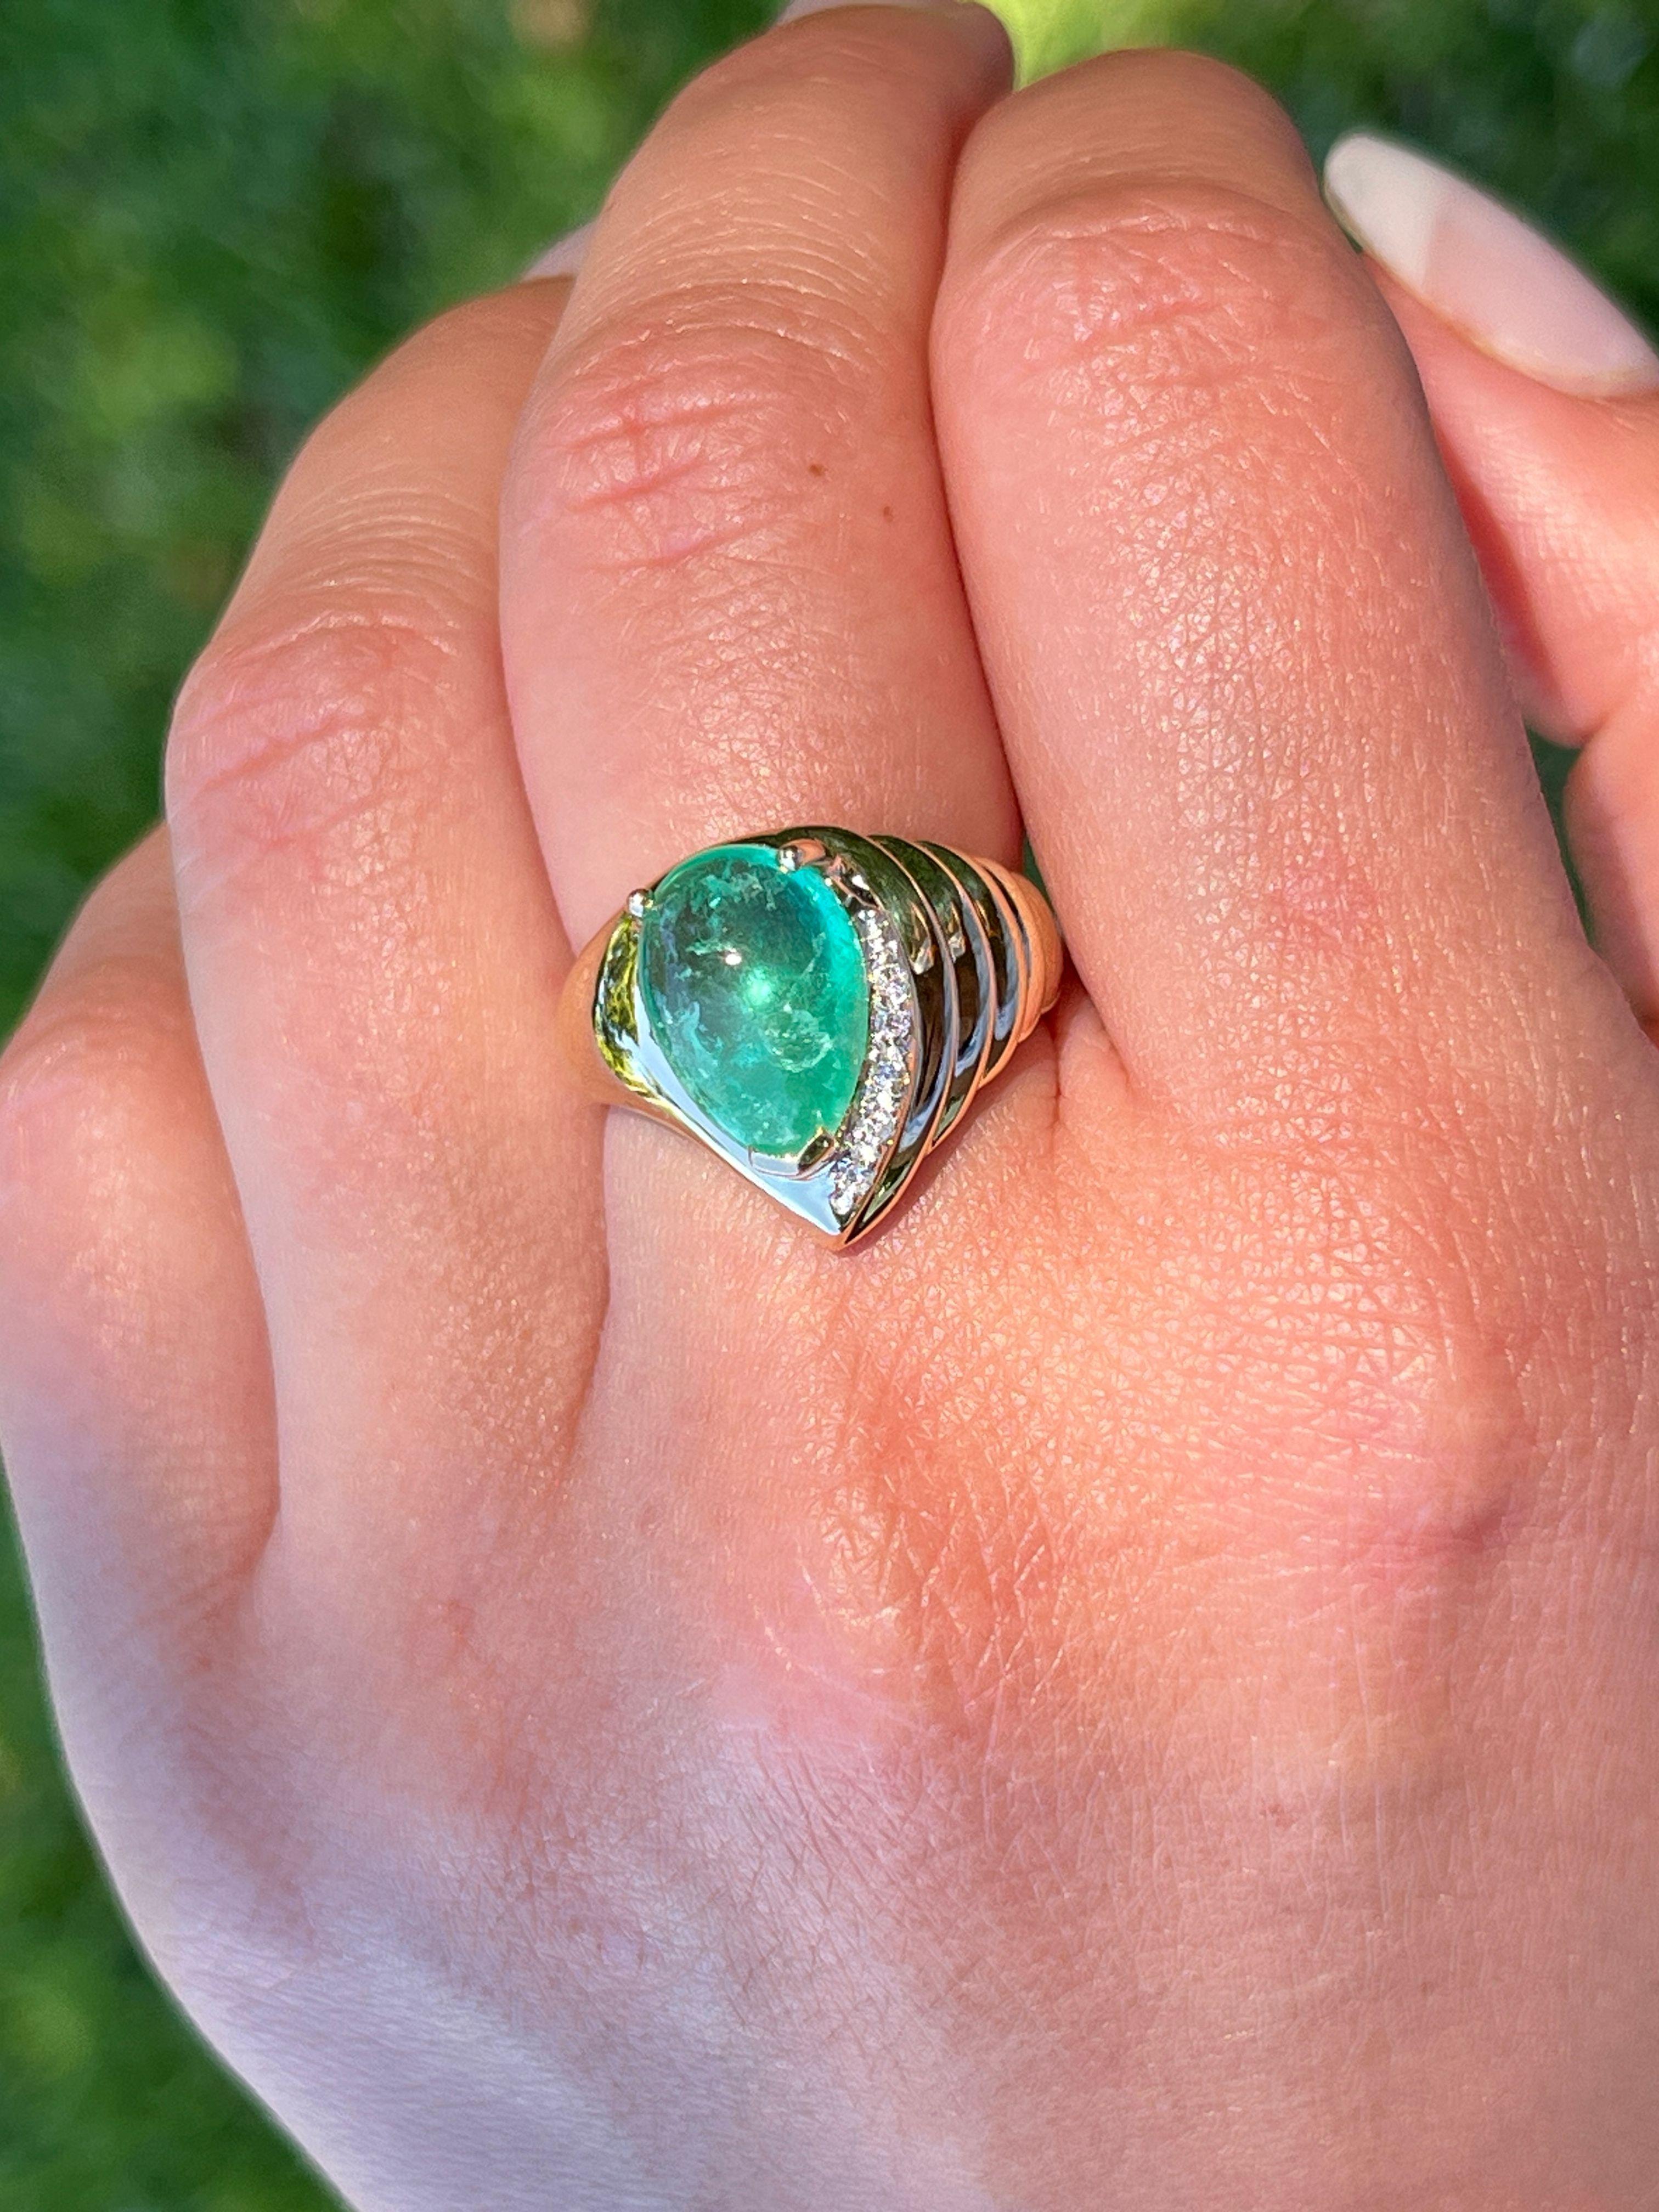 7.81 Carat Pear Shaped Cabochon Emerald Ring with Round Diamonds in 18K Gold In New Condition For Sale In Miami, FL